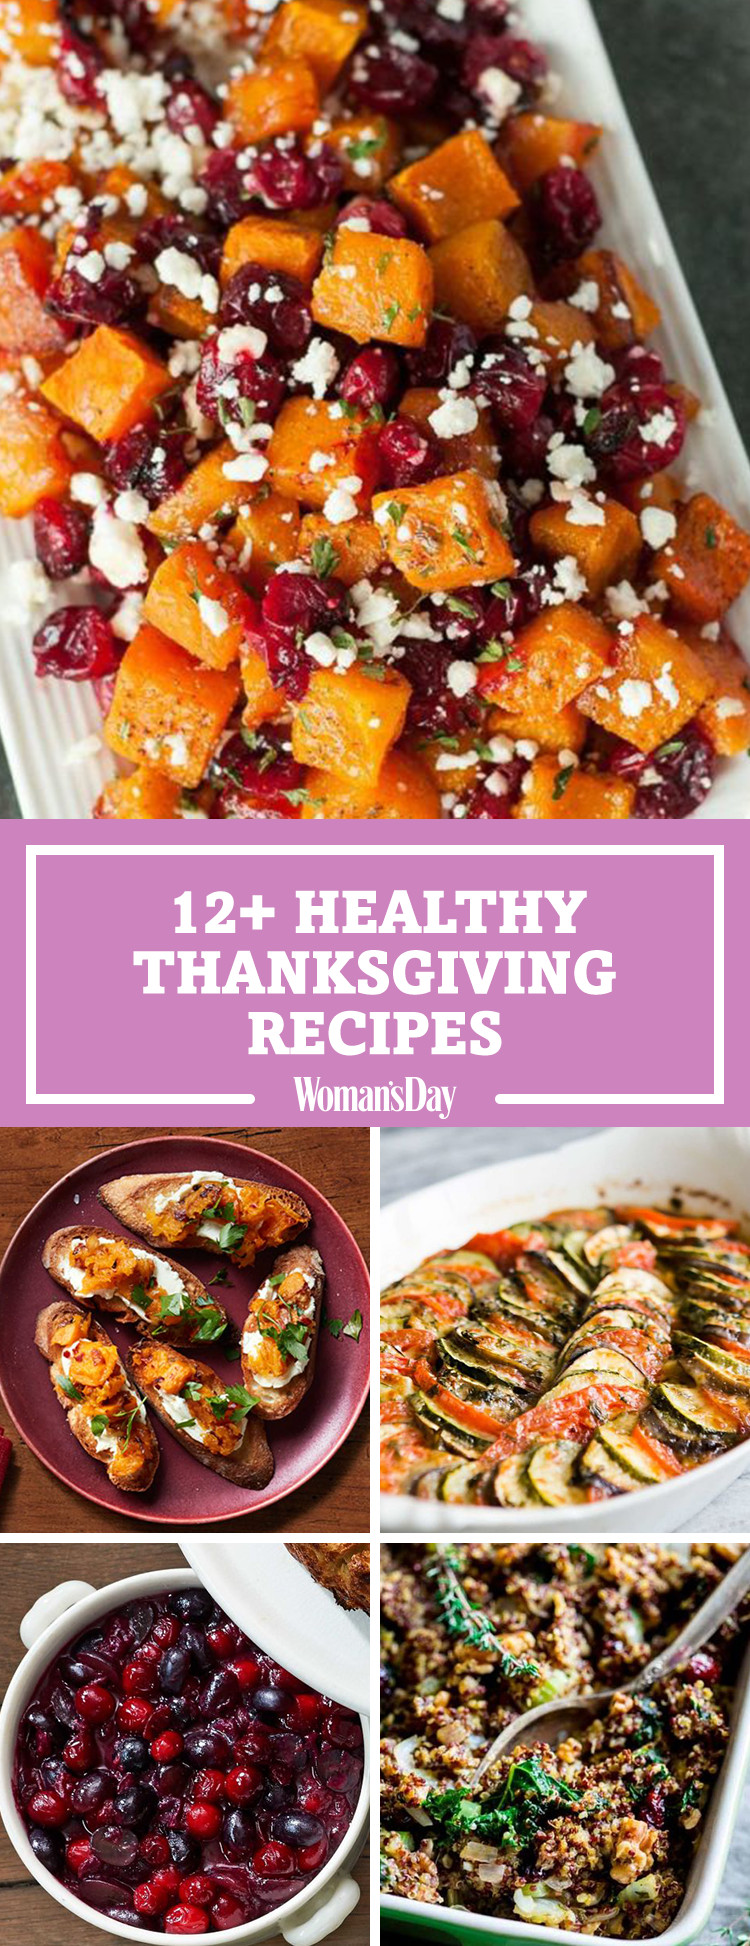 Healthy Side Dishes for Dinner 20 Ideas for 16 Healthy Thanksgiving Dinner Recipes Healthier Sides